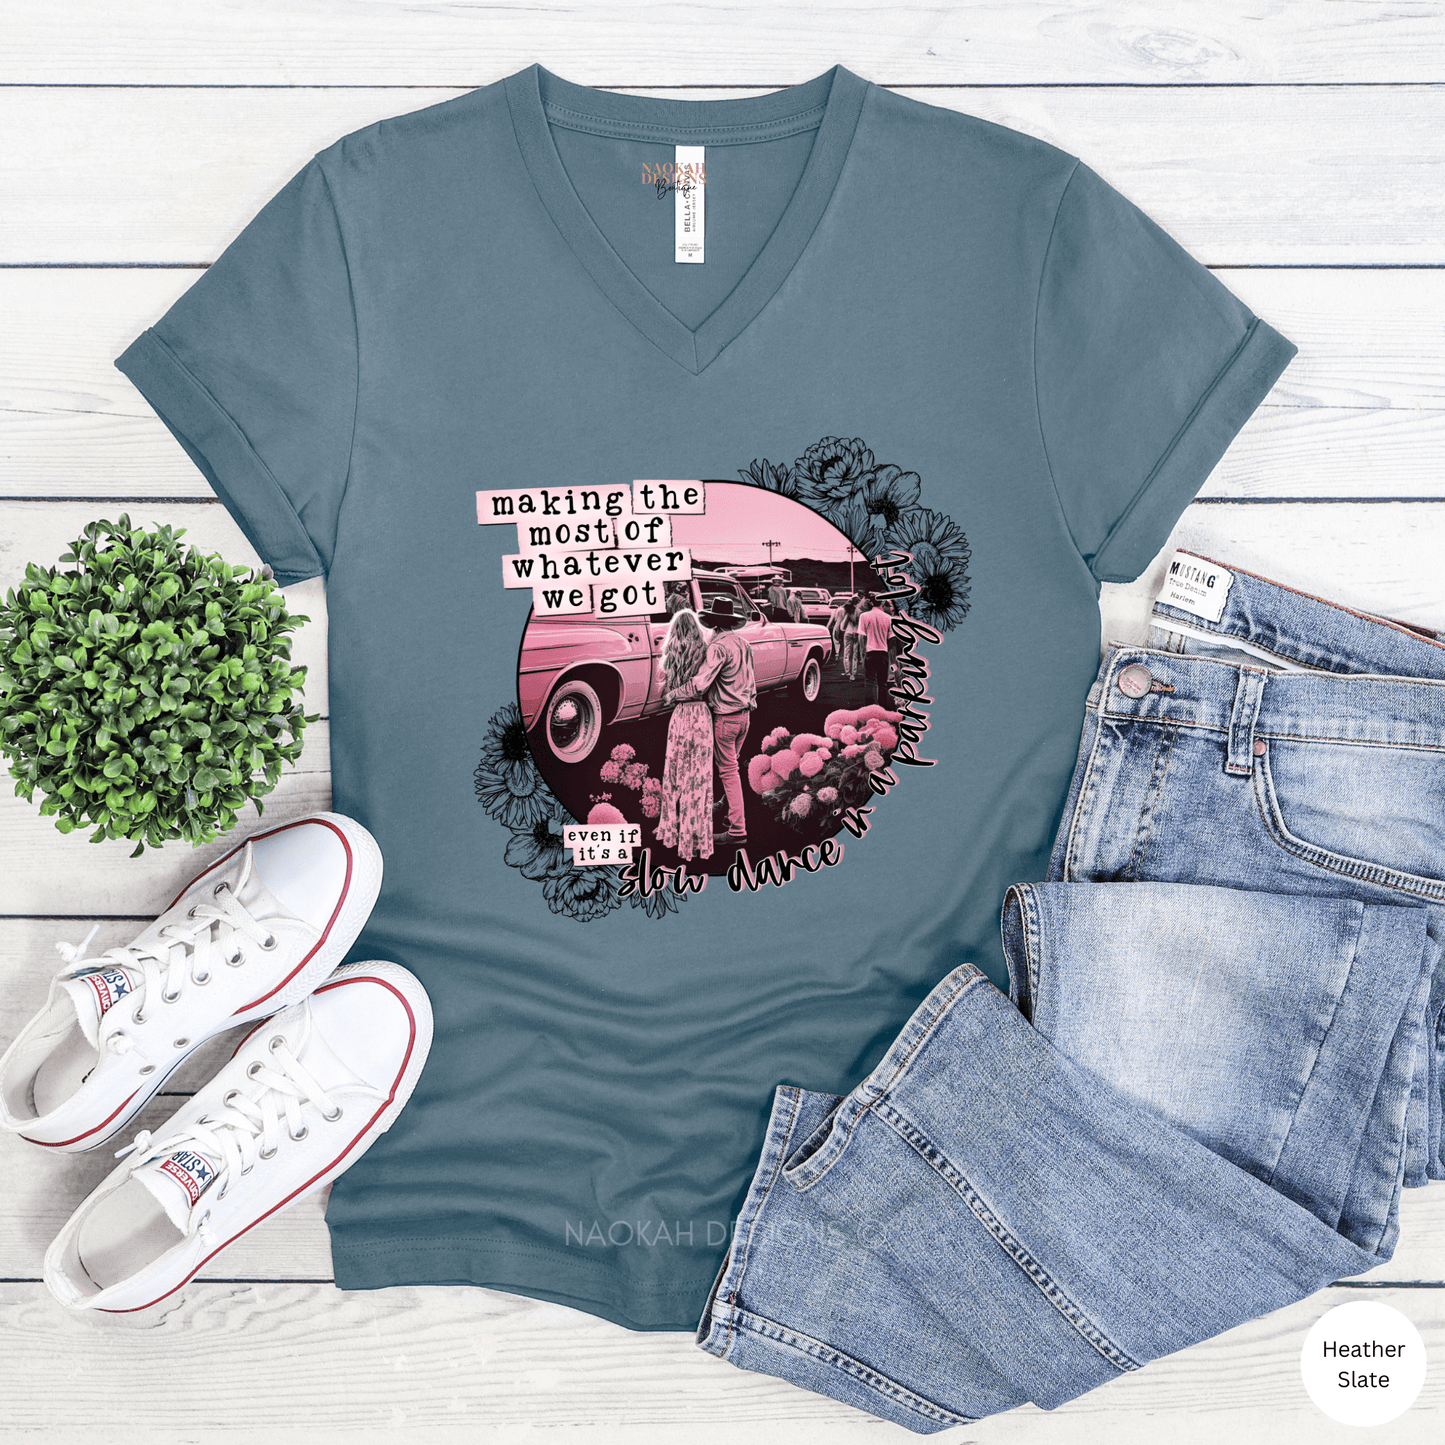 making the most of whatever we got shirt, even if it's a slow dance in a parking lot, boho cowgirl shirt, boho western shirt, cowgirl shirt